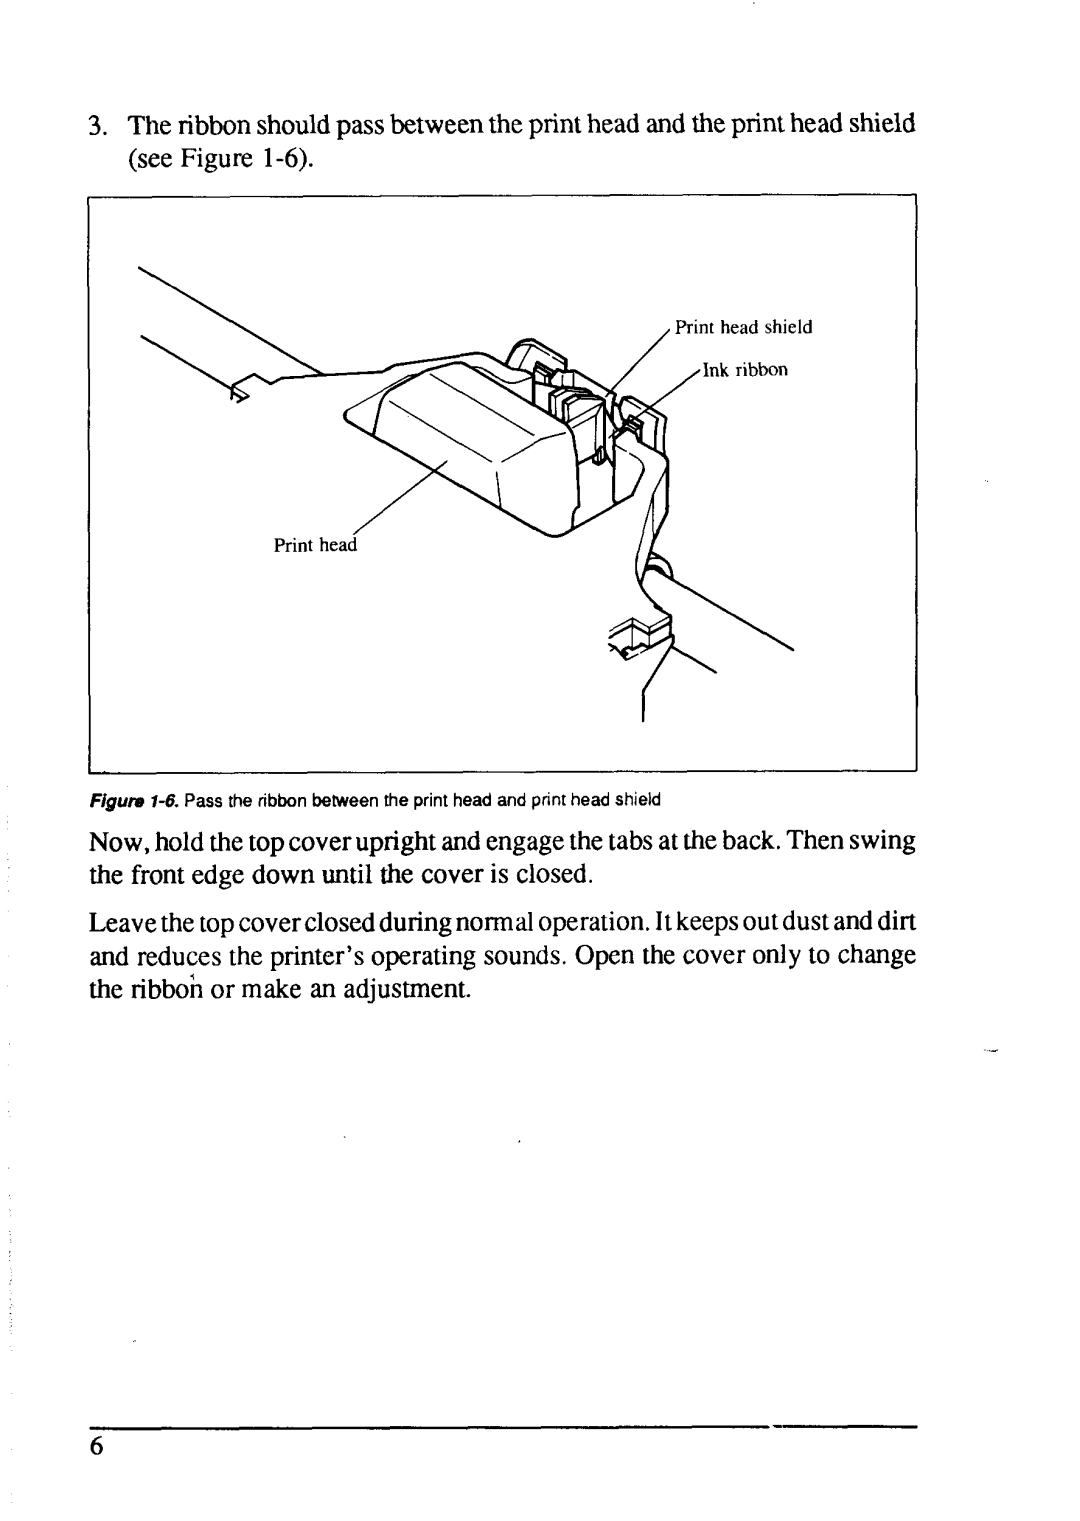 Star Micronics LC24-15 user manual The ribbon should pass between the print head and the print head shield see Figure l-6 